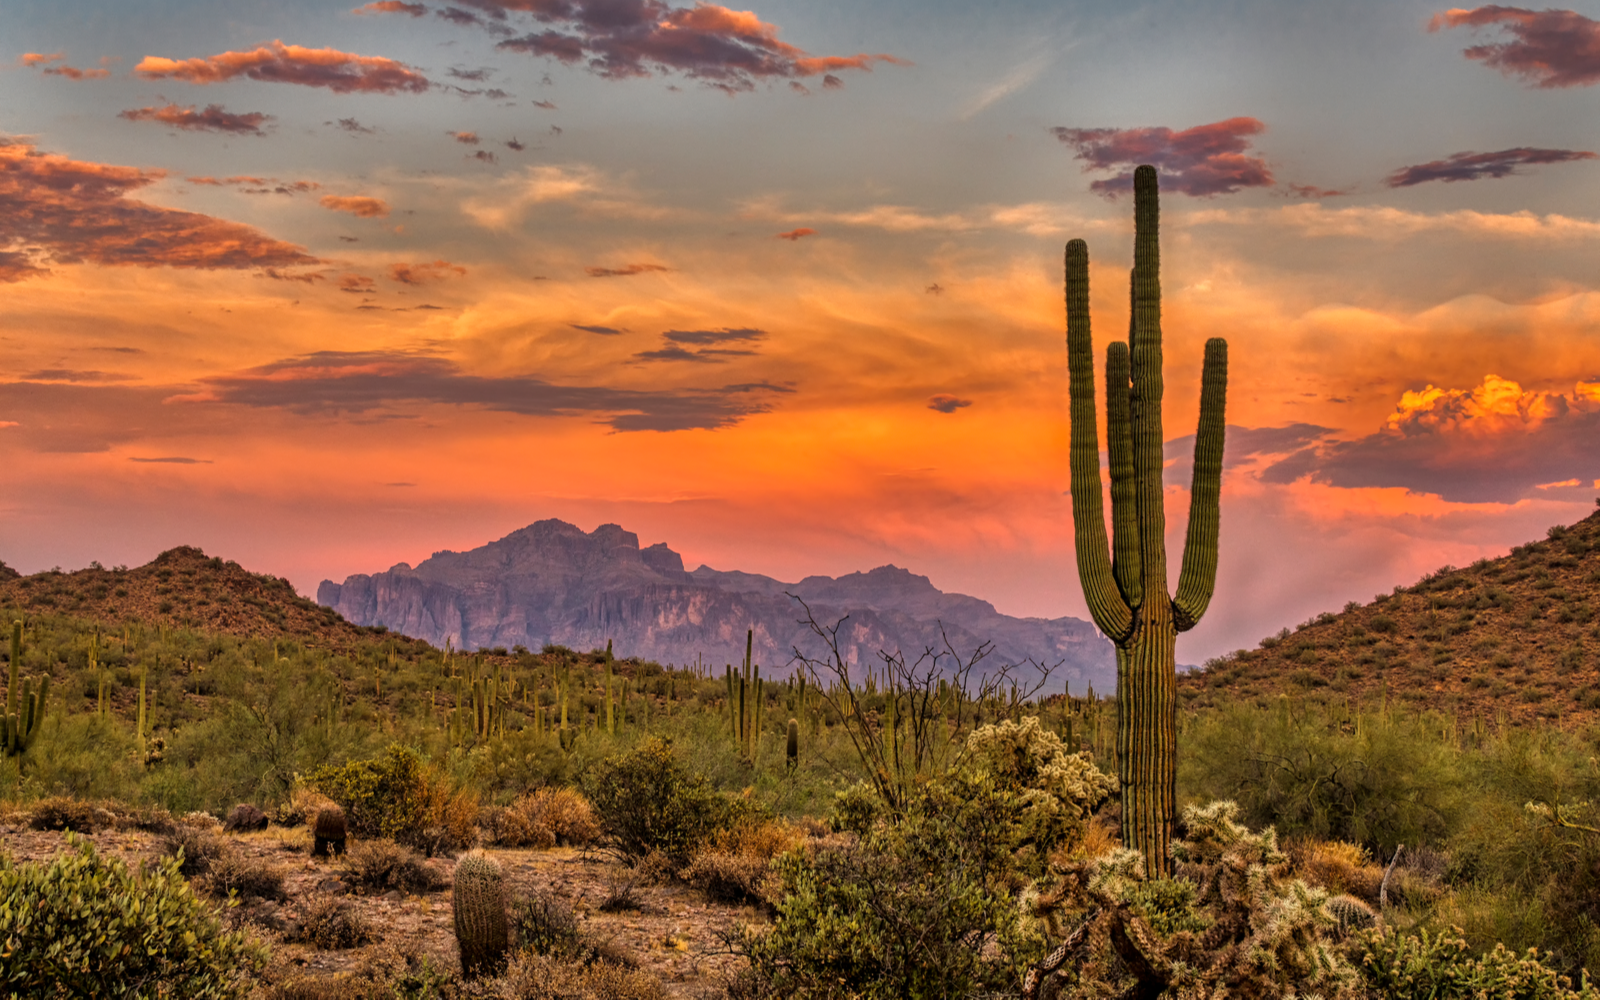 Sunrise in the Sonoran desert (one of the best places to visit in Arizona) with a big cactus in the foreground